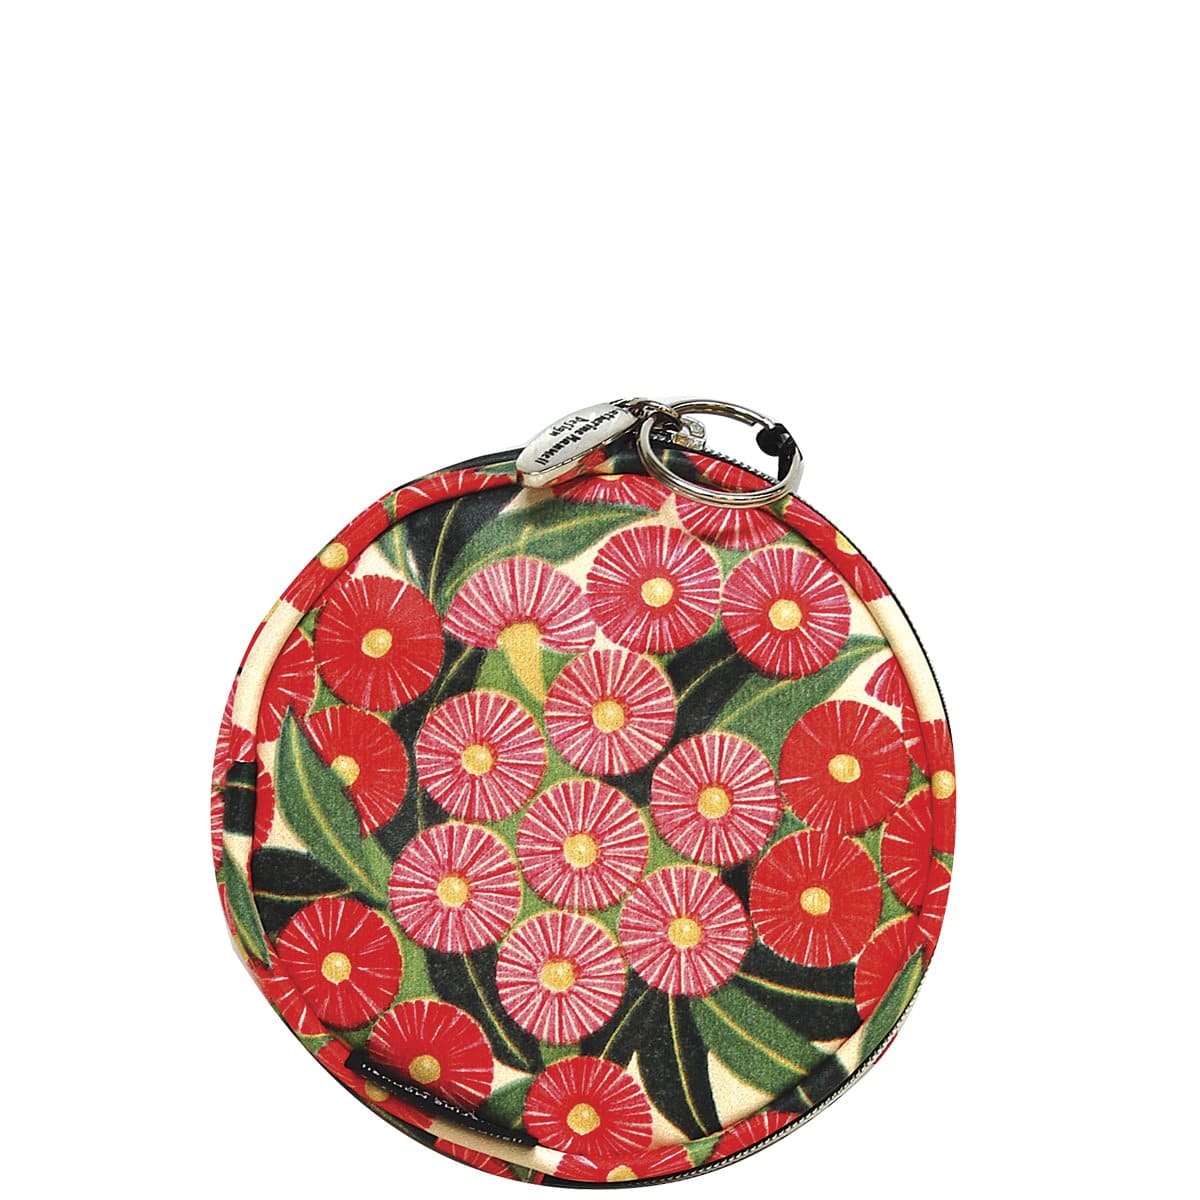 Floral Full Moon Coin Purse - Flowering Gums